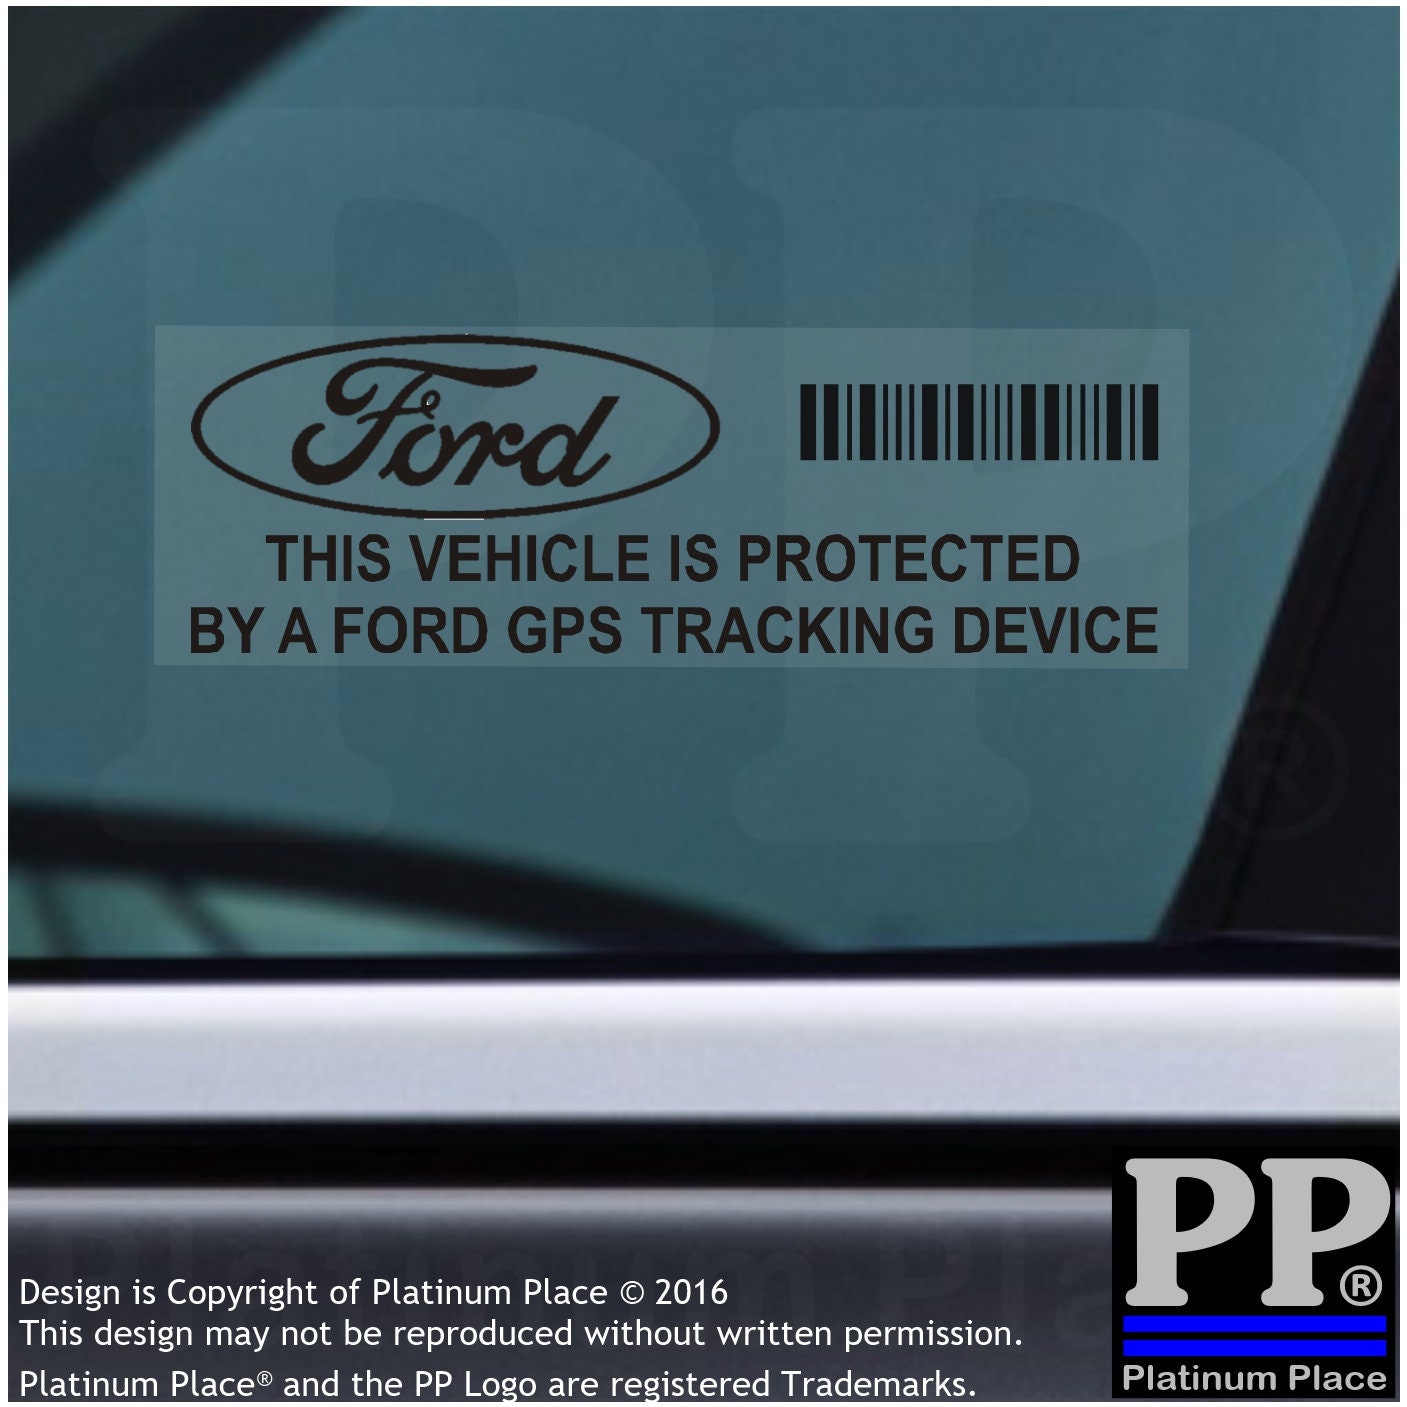 CAR TRACKER FITTED OBD PORT FORD FIESTA RS ST DETER THEFT 2 x WINDOW STICKERS 